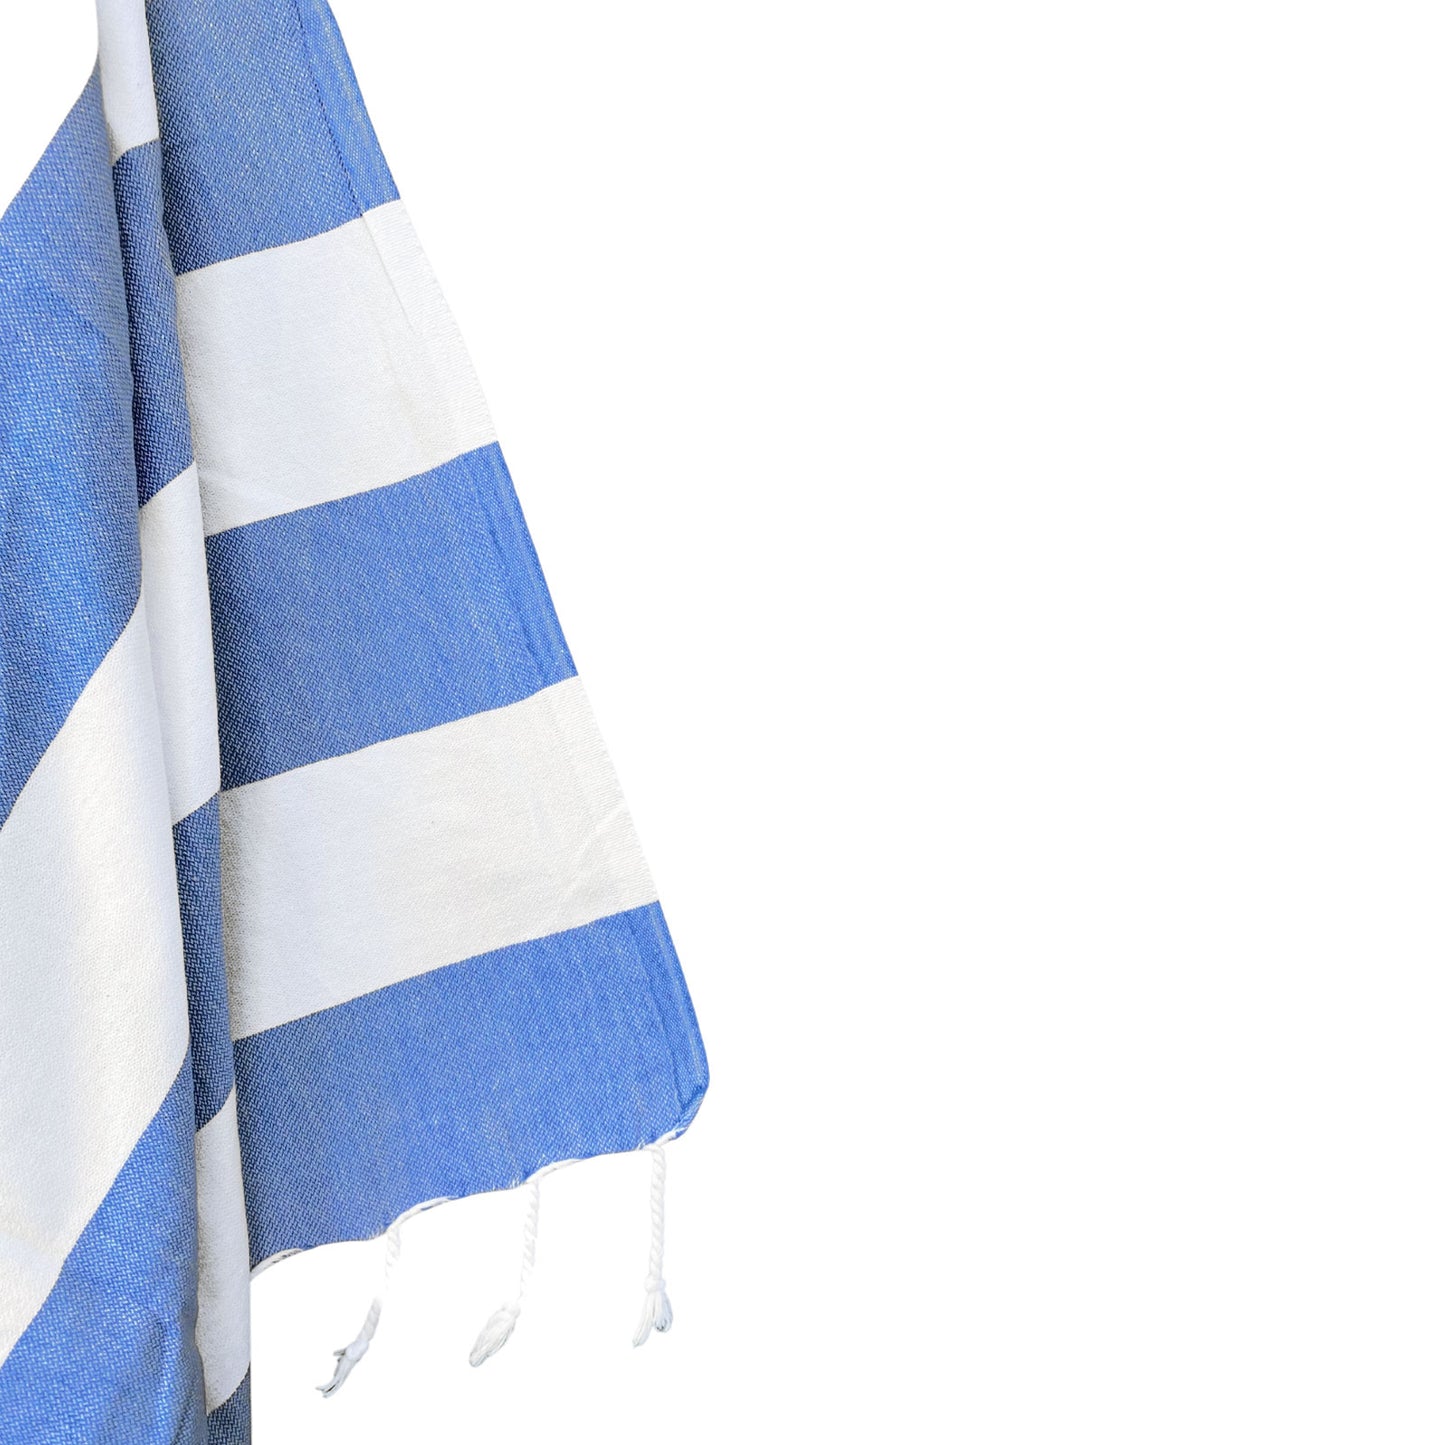 Springs Turkish Beach Towel in Royal Blue and White